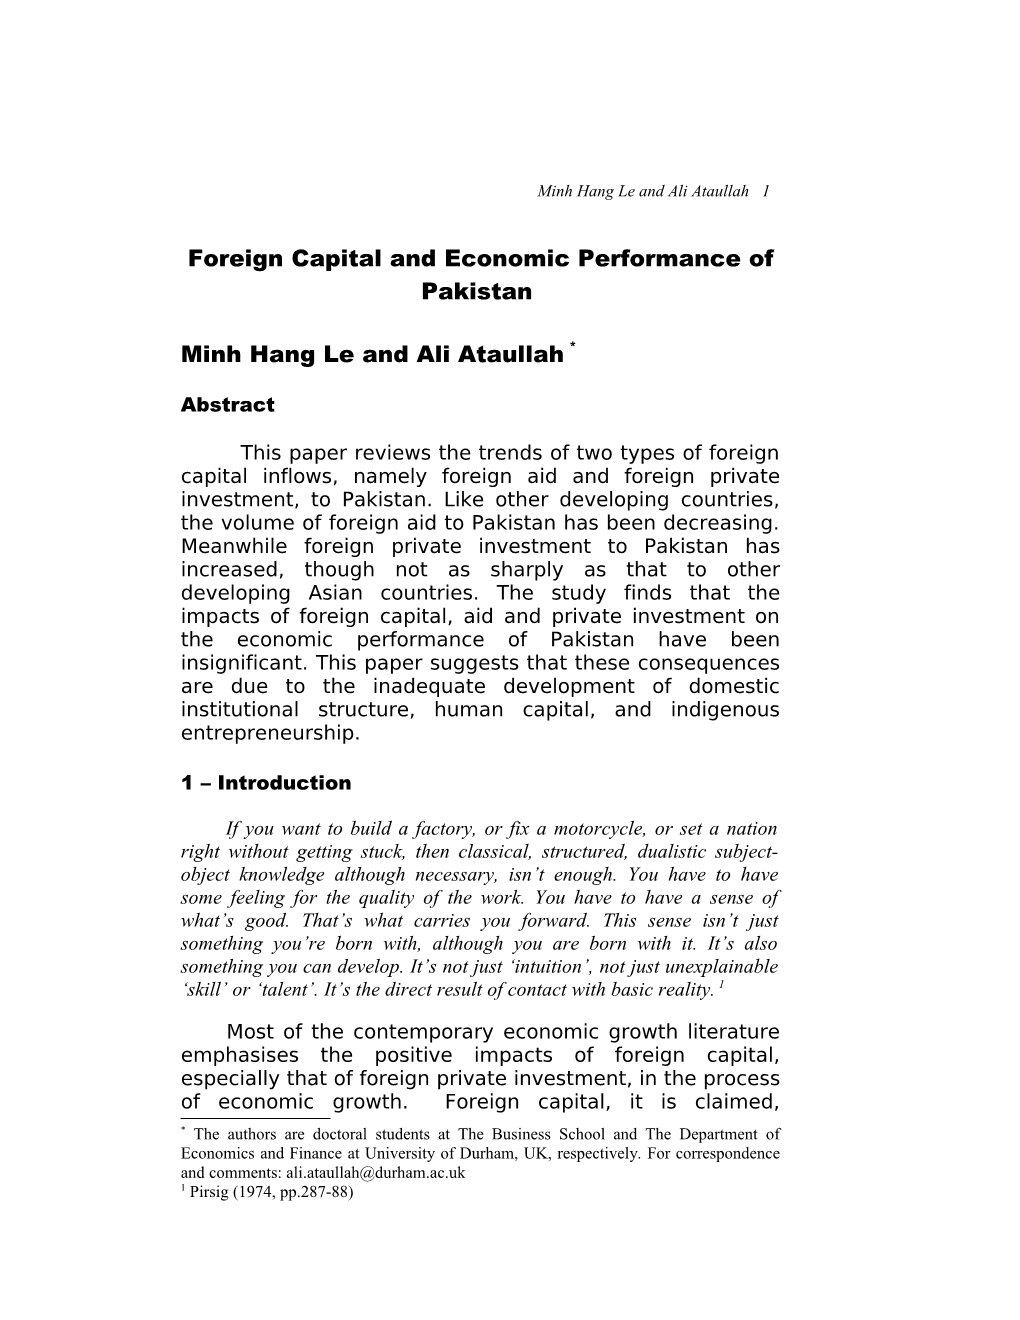 Foreign Capital and Economic Performance of Pakistan